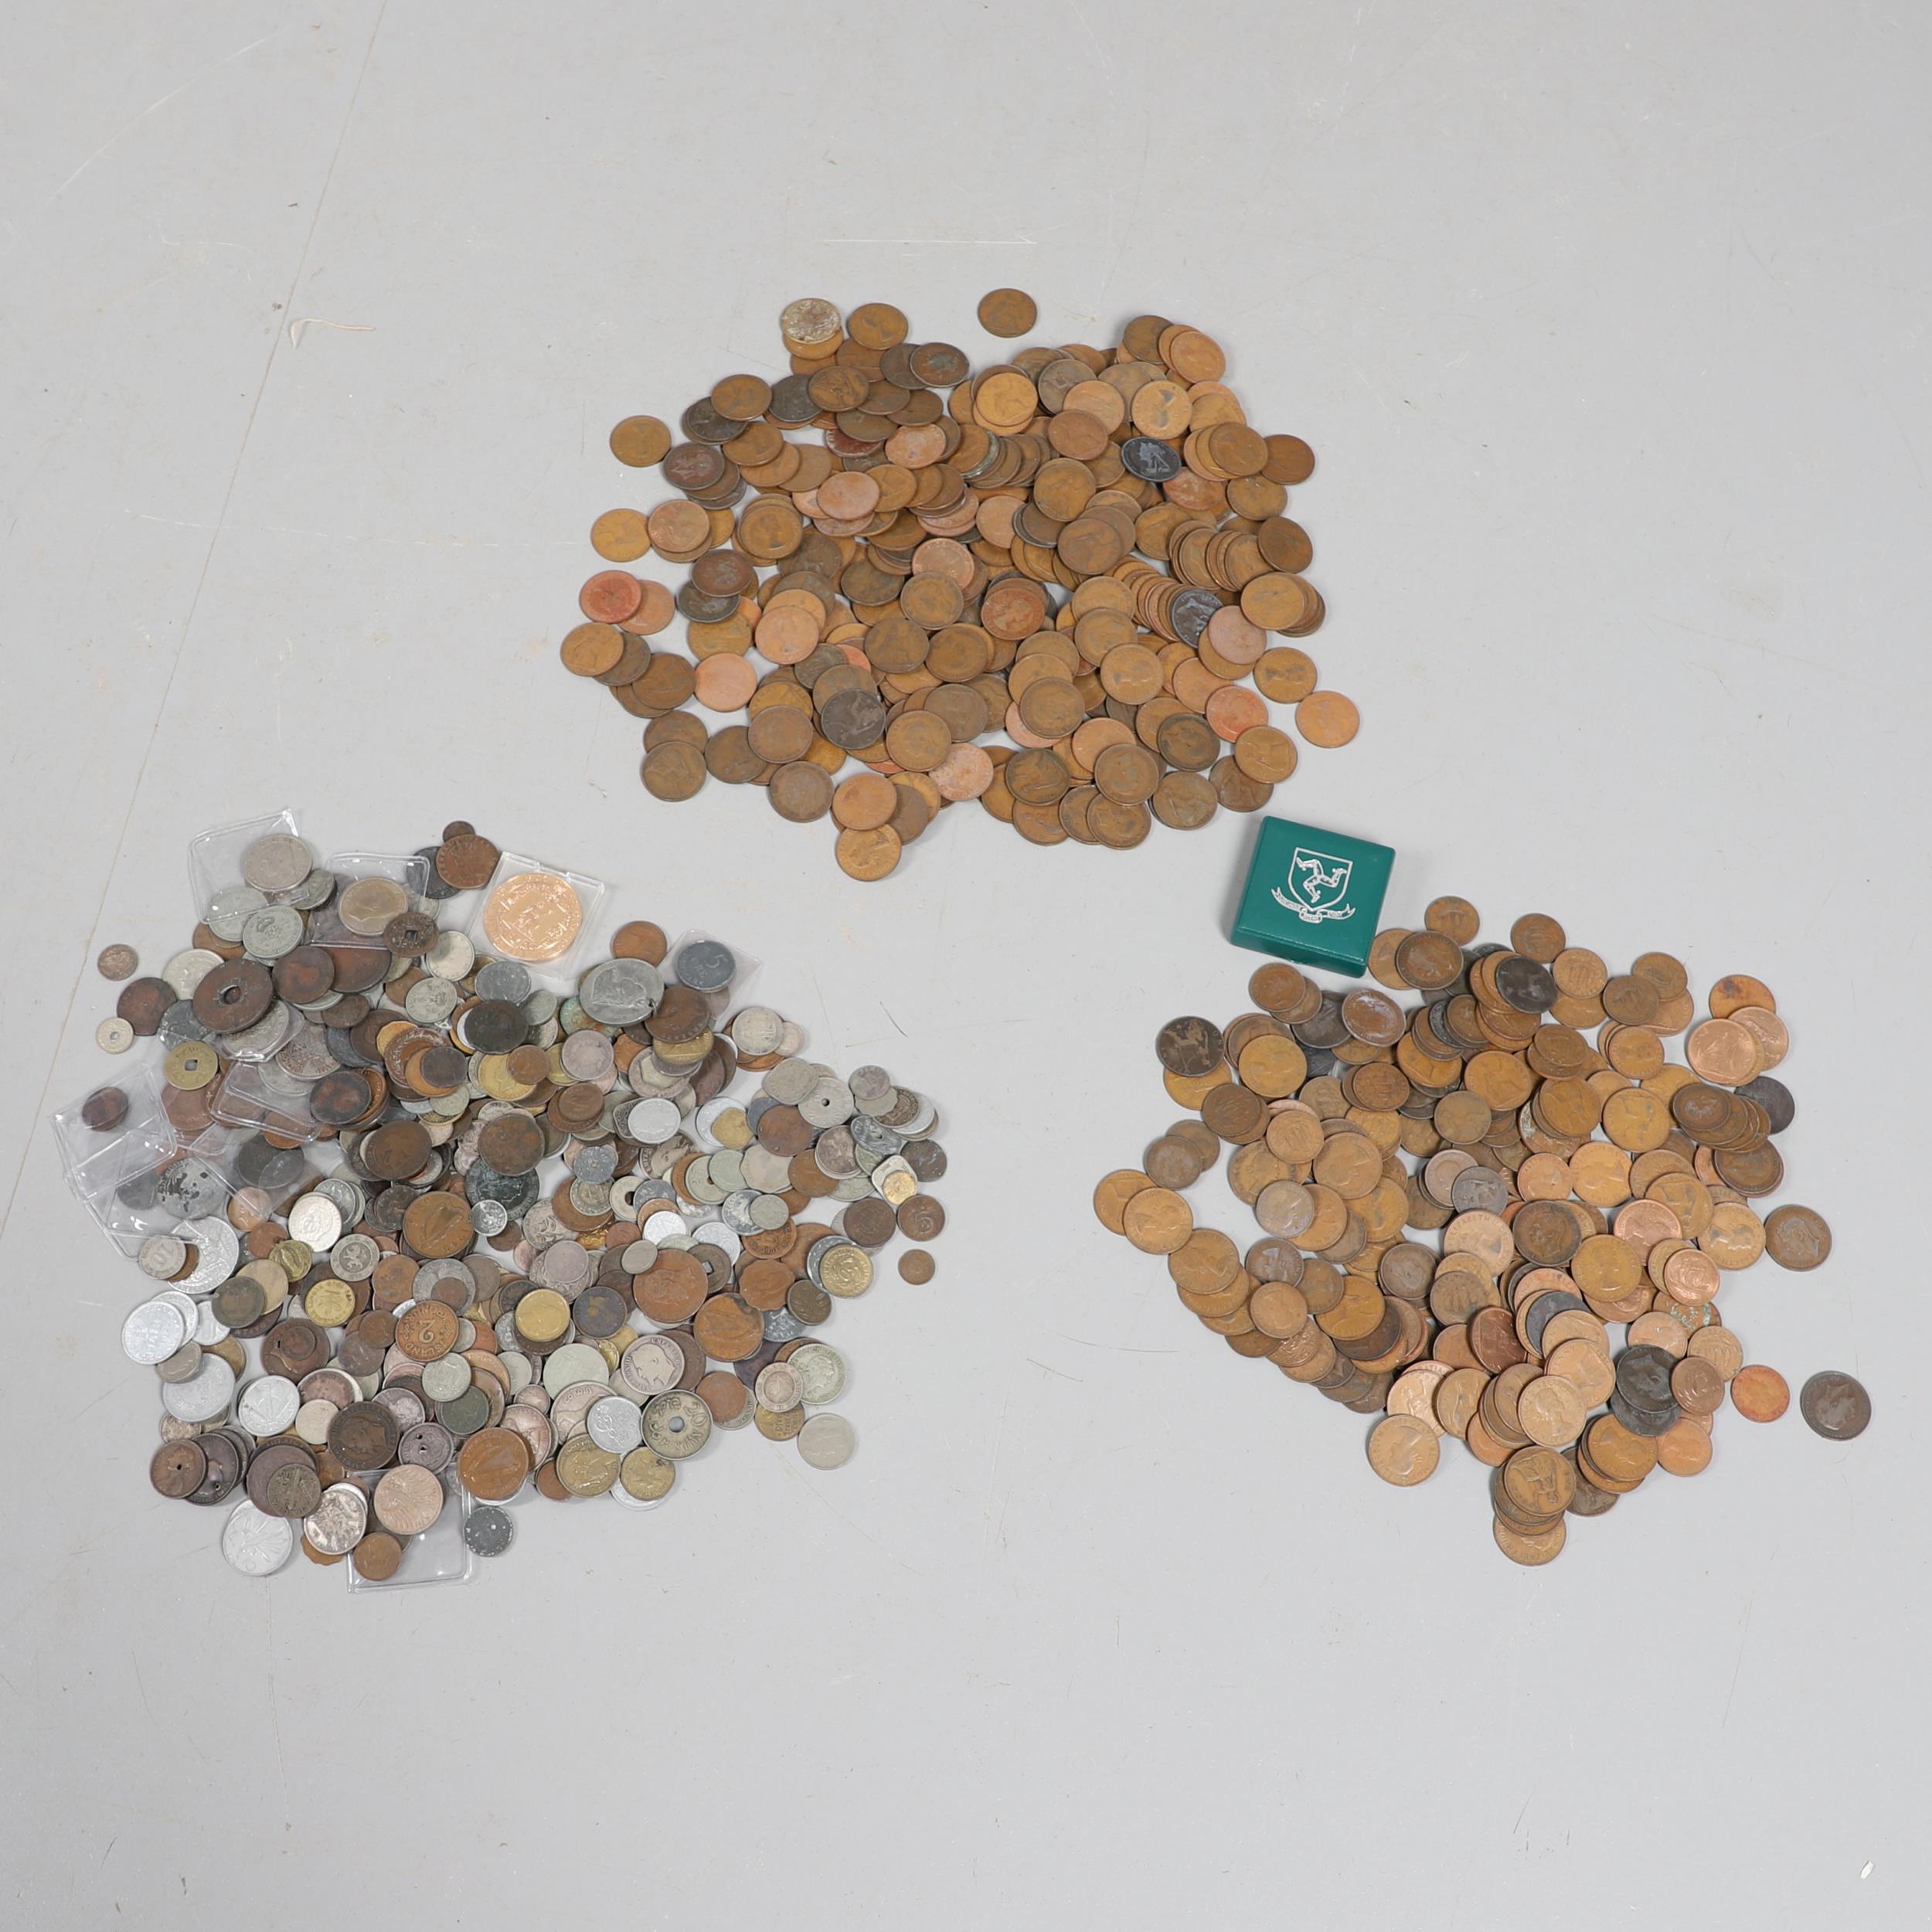 A LARGE COLLECTION OF WORLD COINS AND SIMILAR BRITISH COINS.